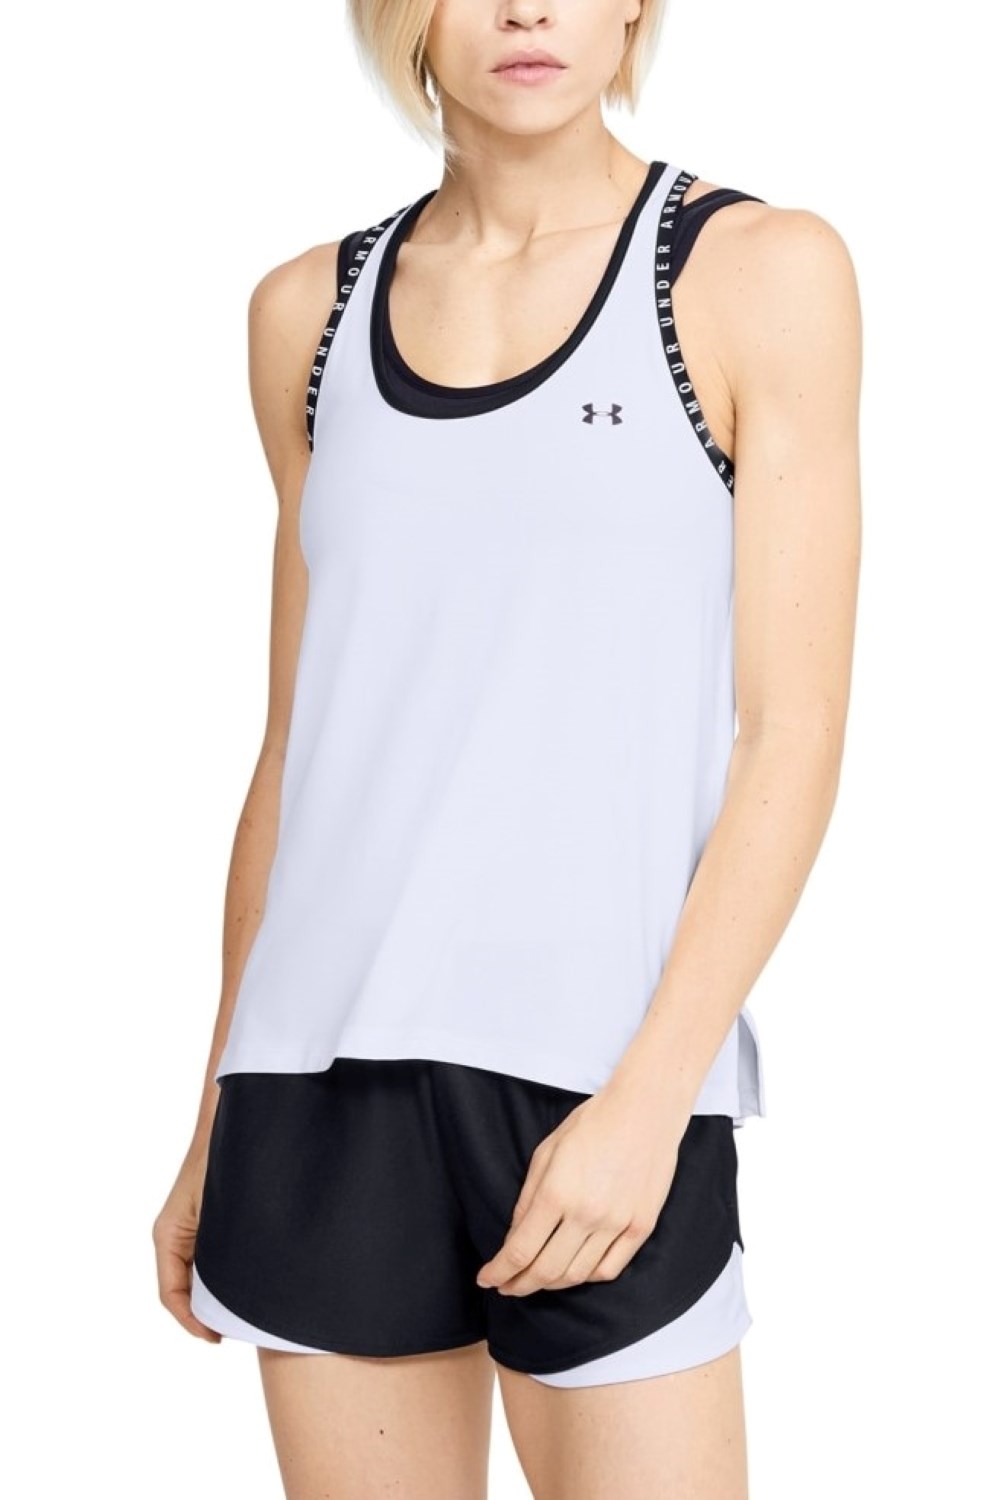 Knockout Womens Active Tank Top -